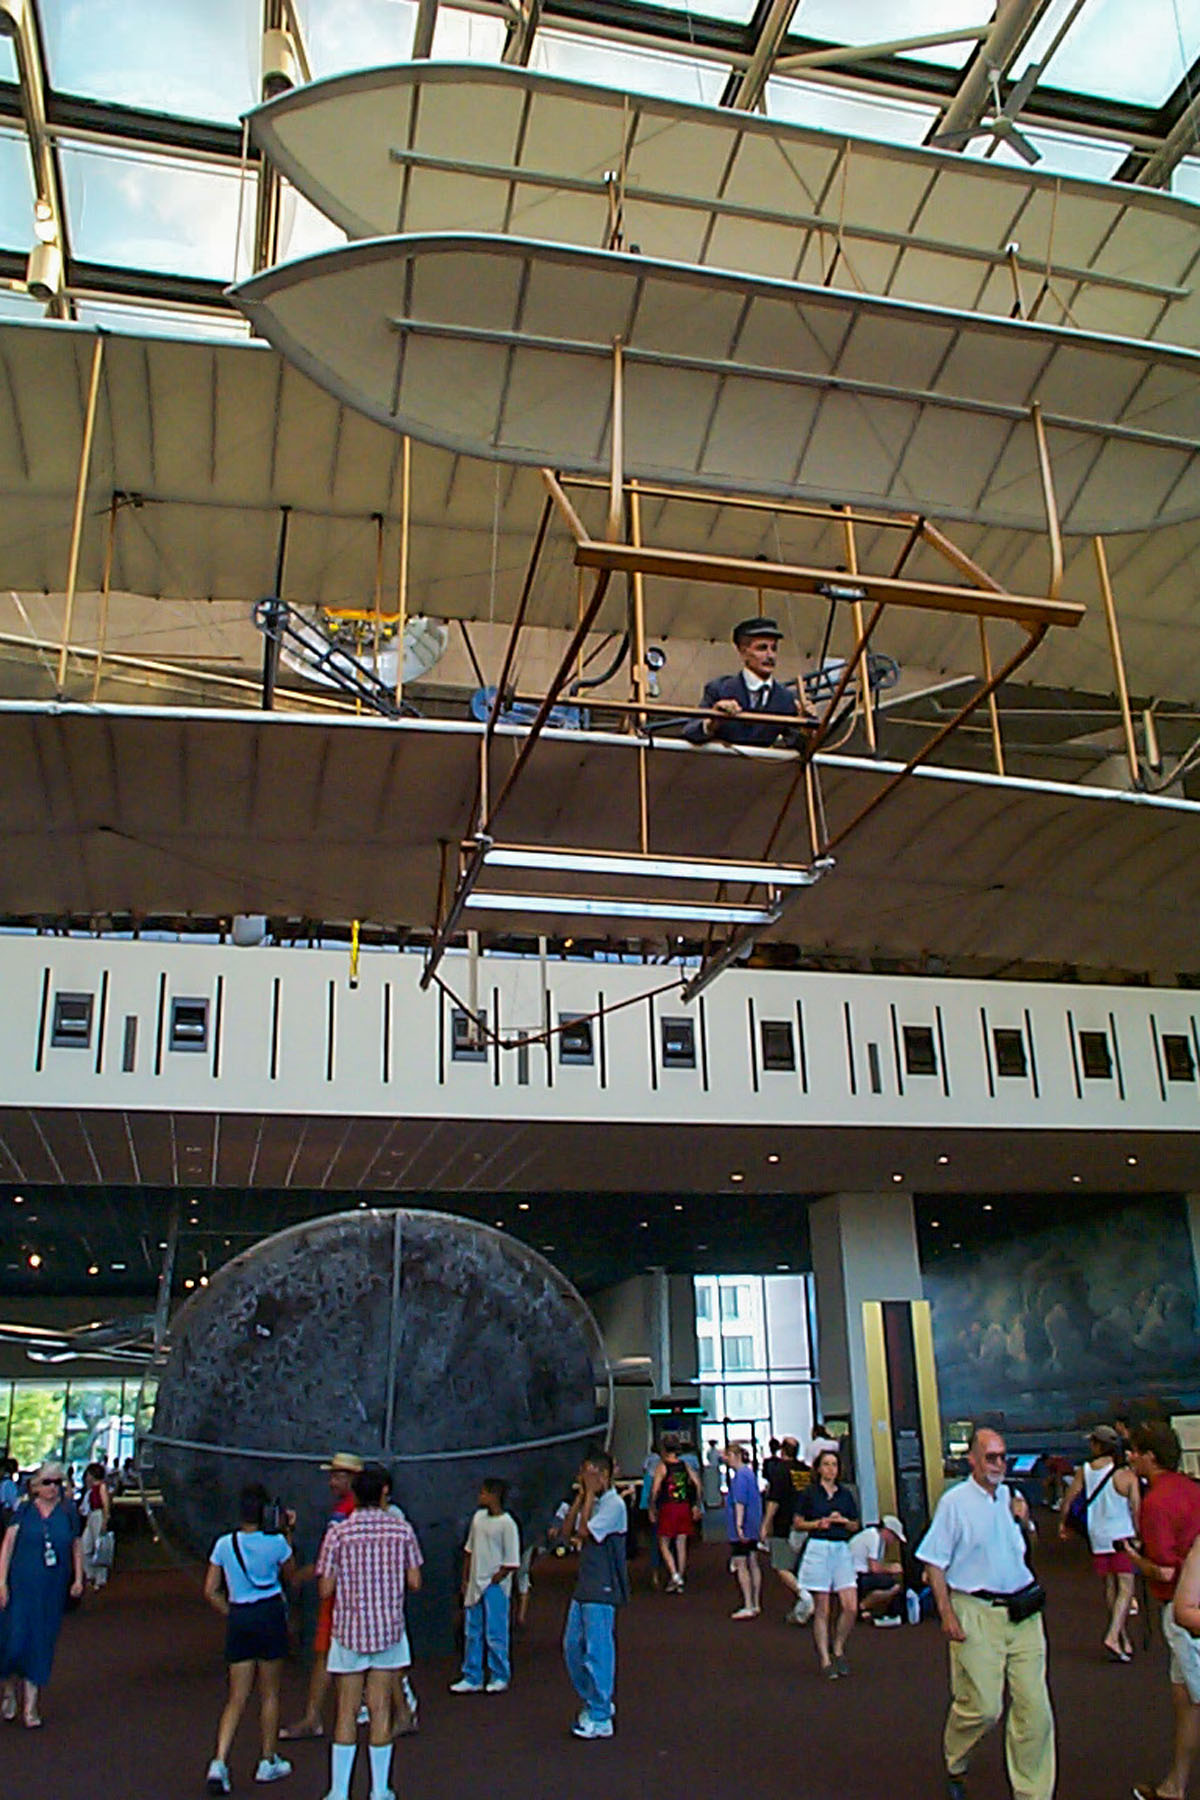 1903 Wright Flyer above Apollo 11 command capsule Columbia, National Air and Space Museum, Washington.  Click for next photo.